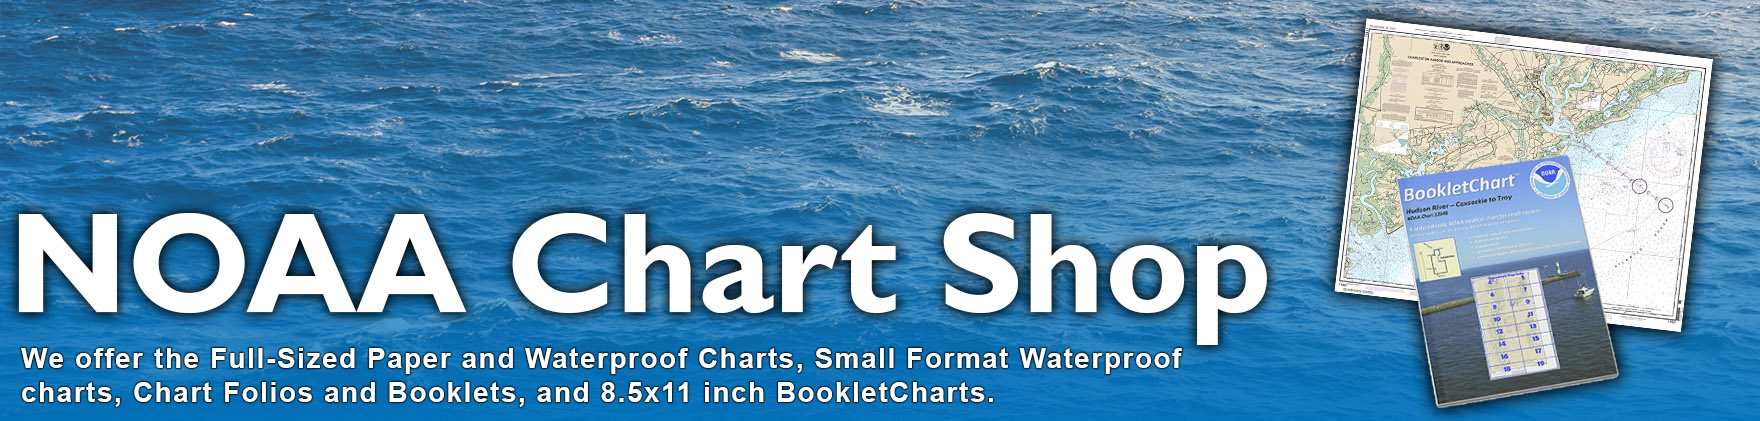 Paradise Cay Publications Small Format Waterproof Inc NOAA Chart 13249: Provincetown Harbor 21.00 x 25.40